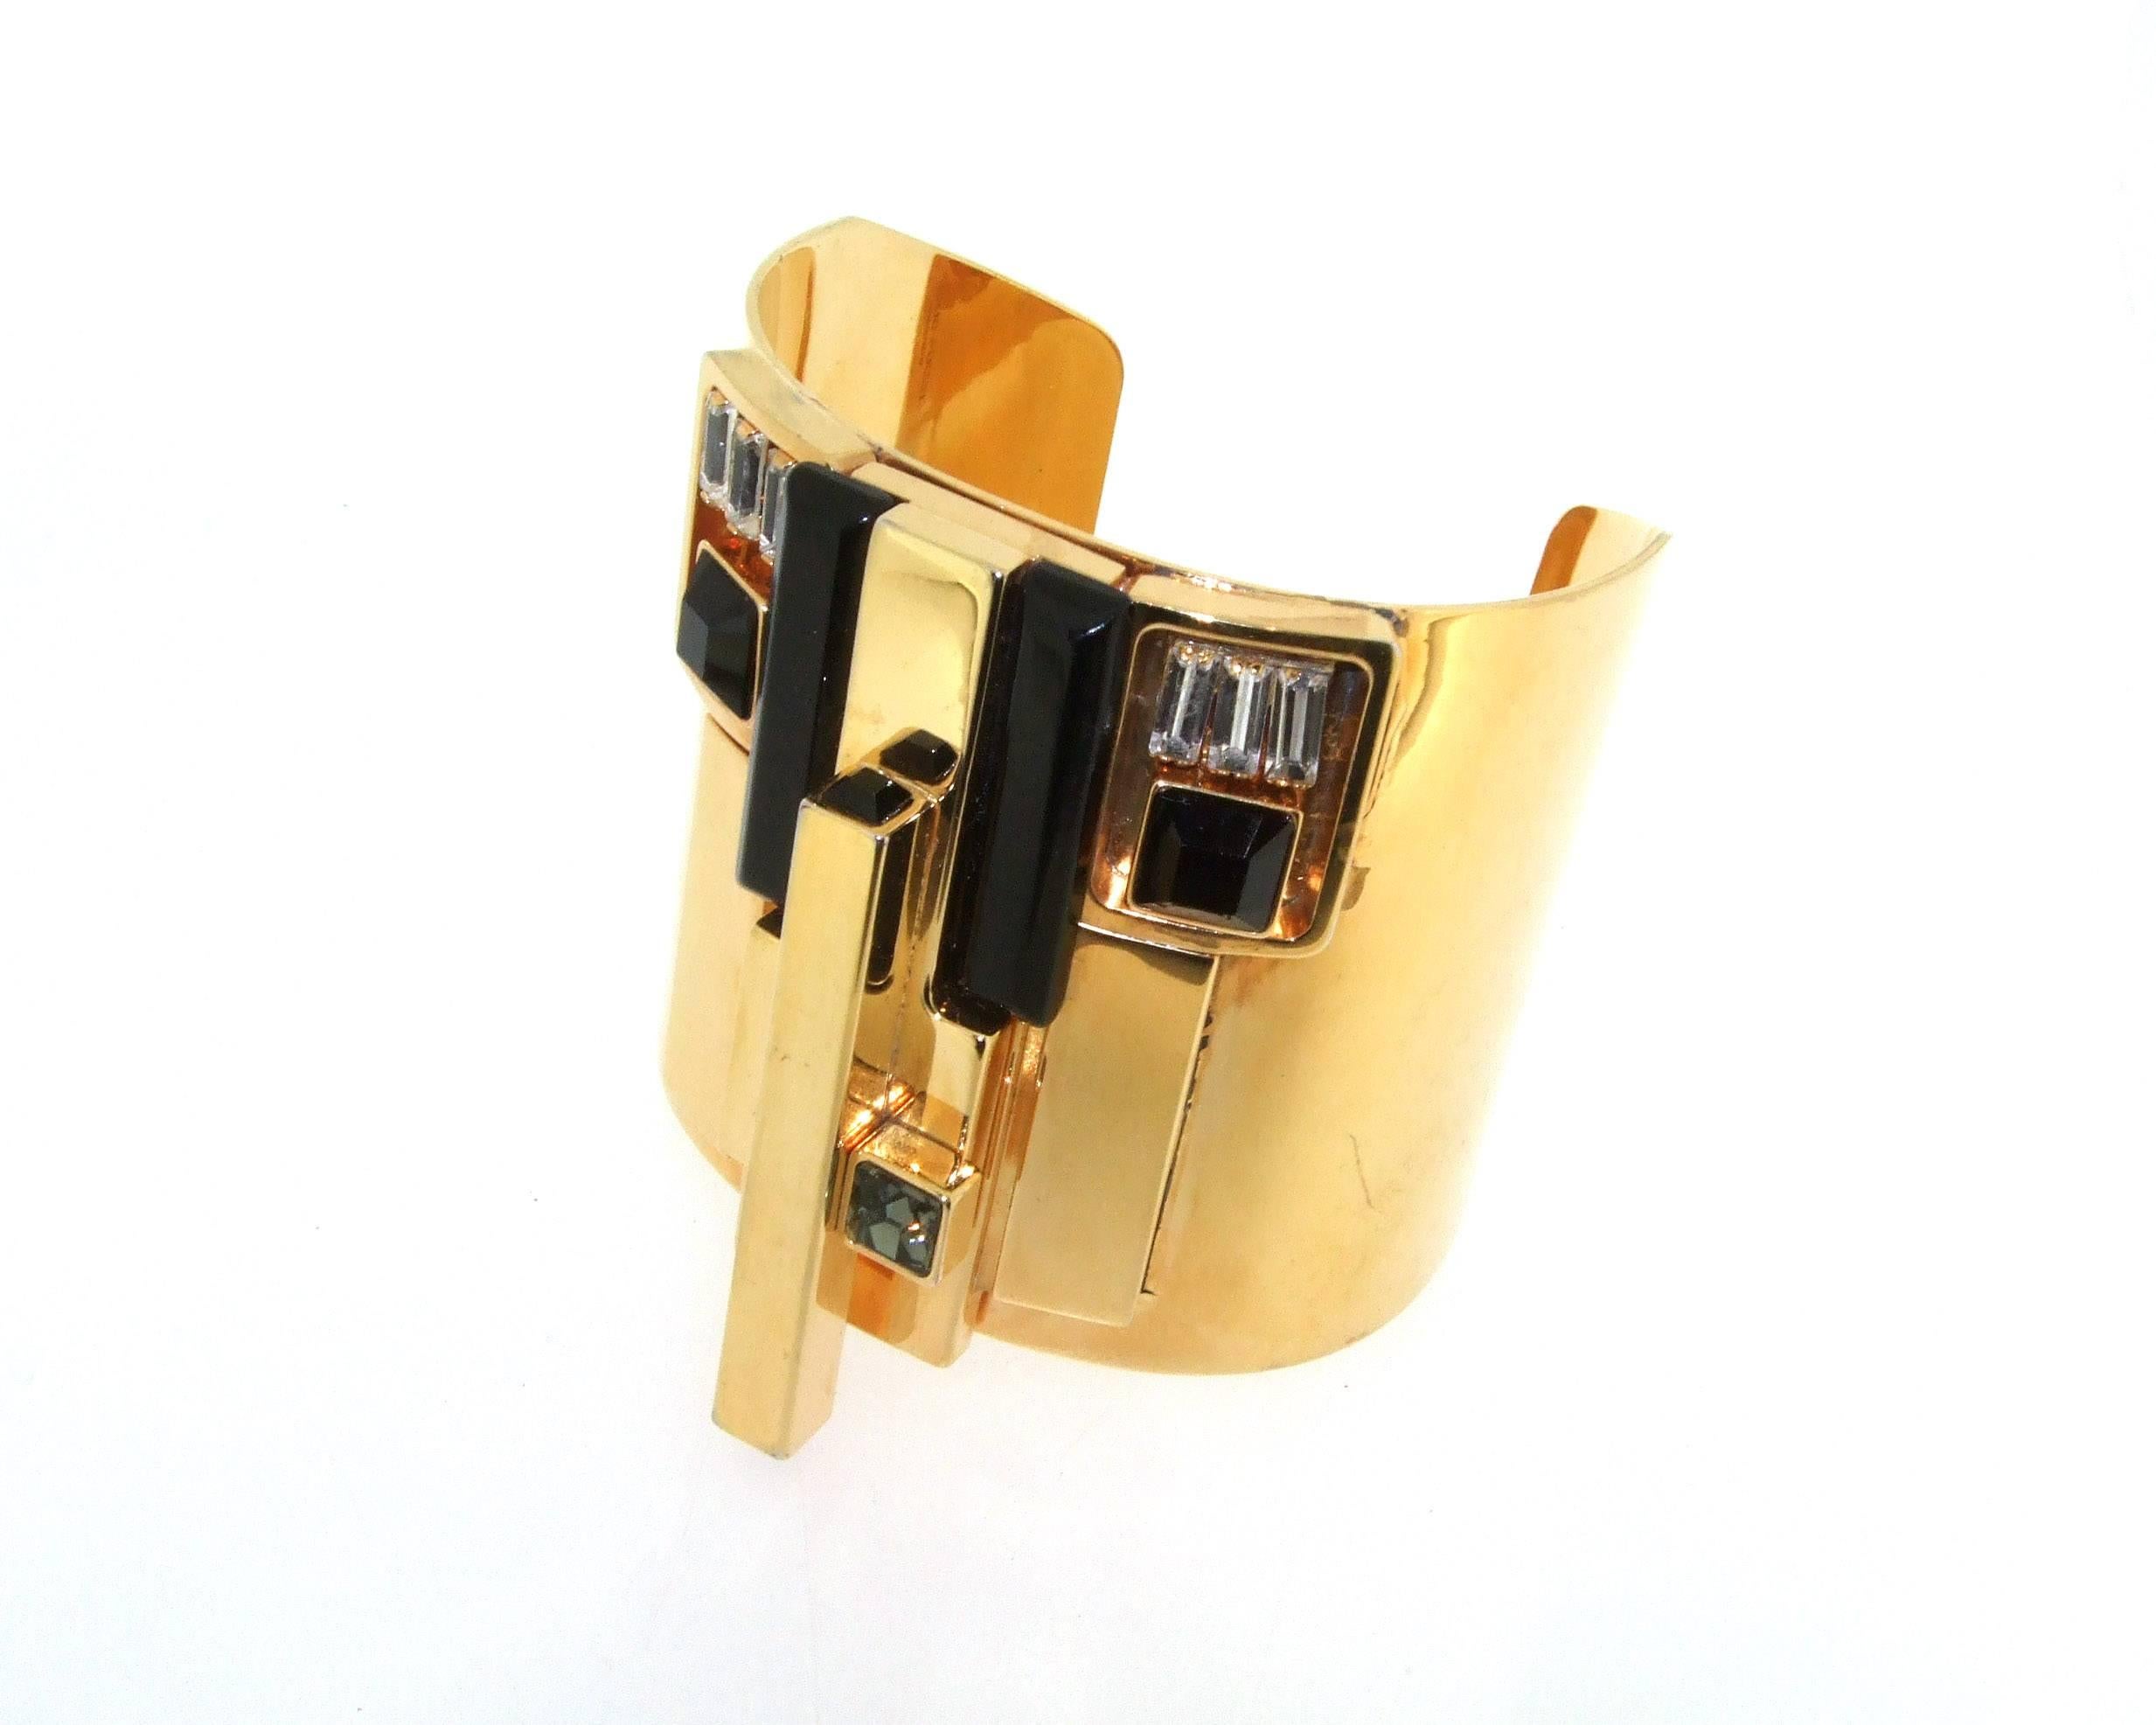 A stunning cuff bracelet by Emilio Pucci in and Art Deco stye with a modernist twist. It is made in shiny brass and set with black glass, smoky and clear crystals.

It measures 5.9cm high by 6.1cm across. 7 inches around the wrist, to fit  medium